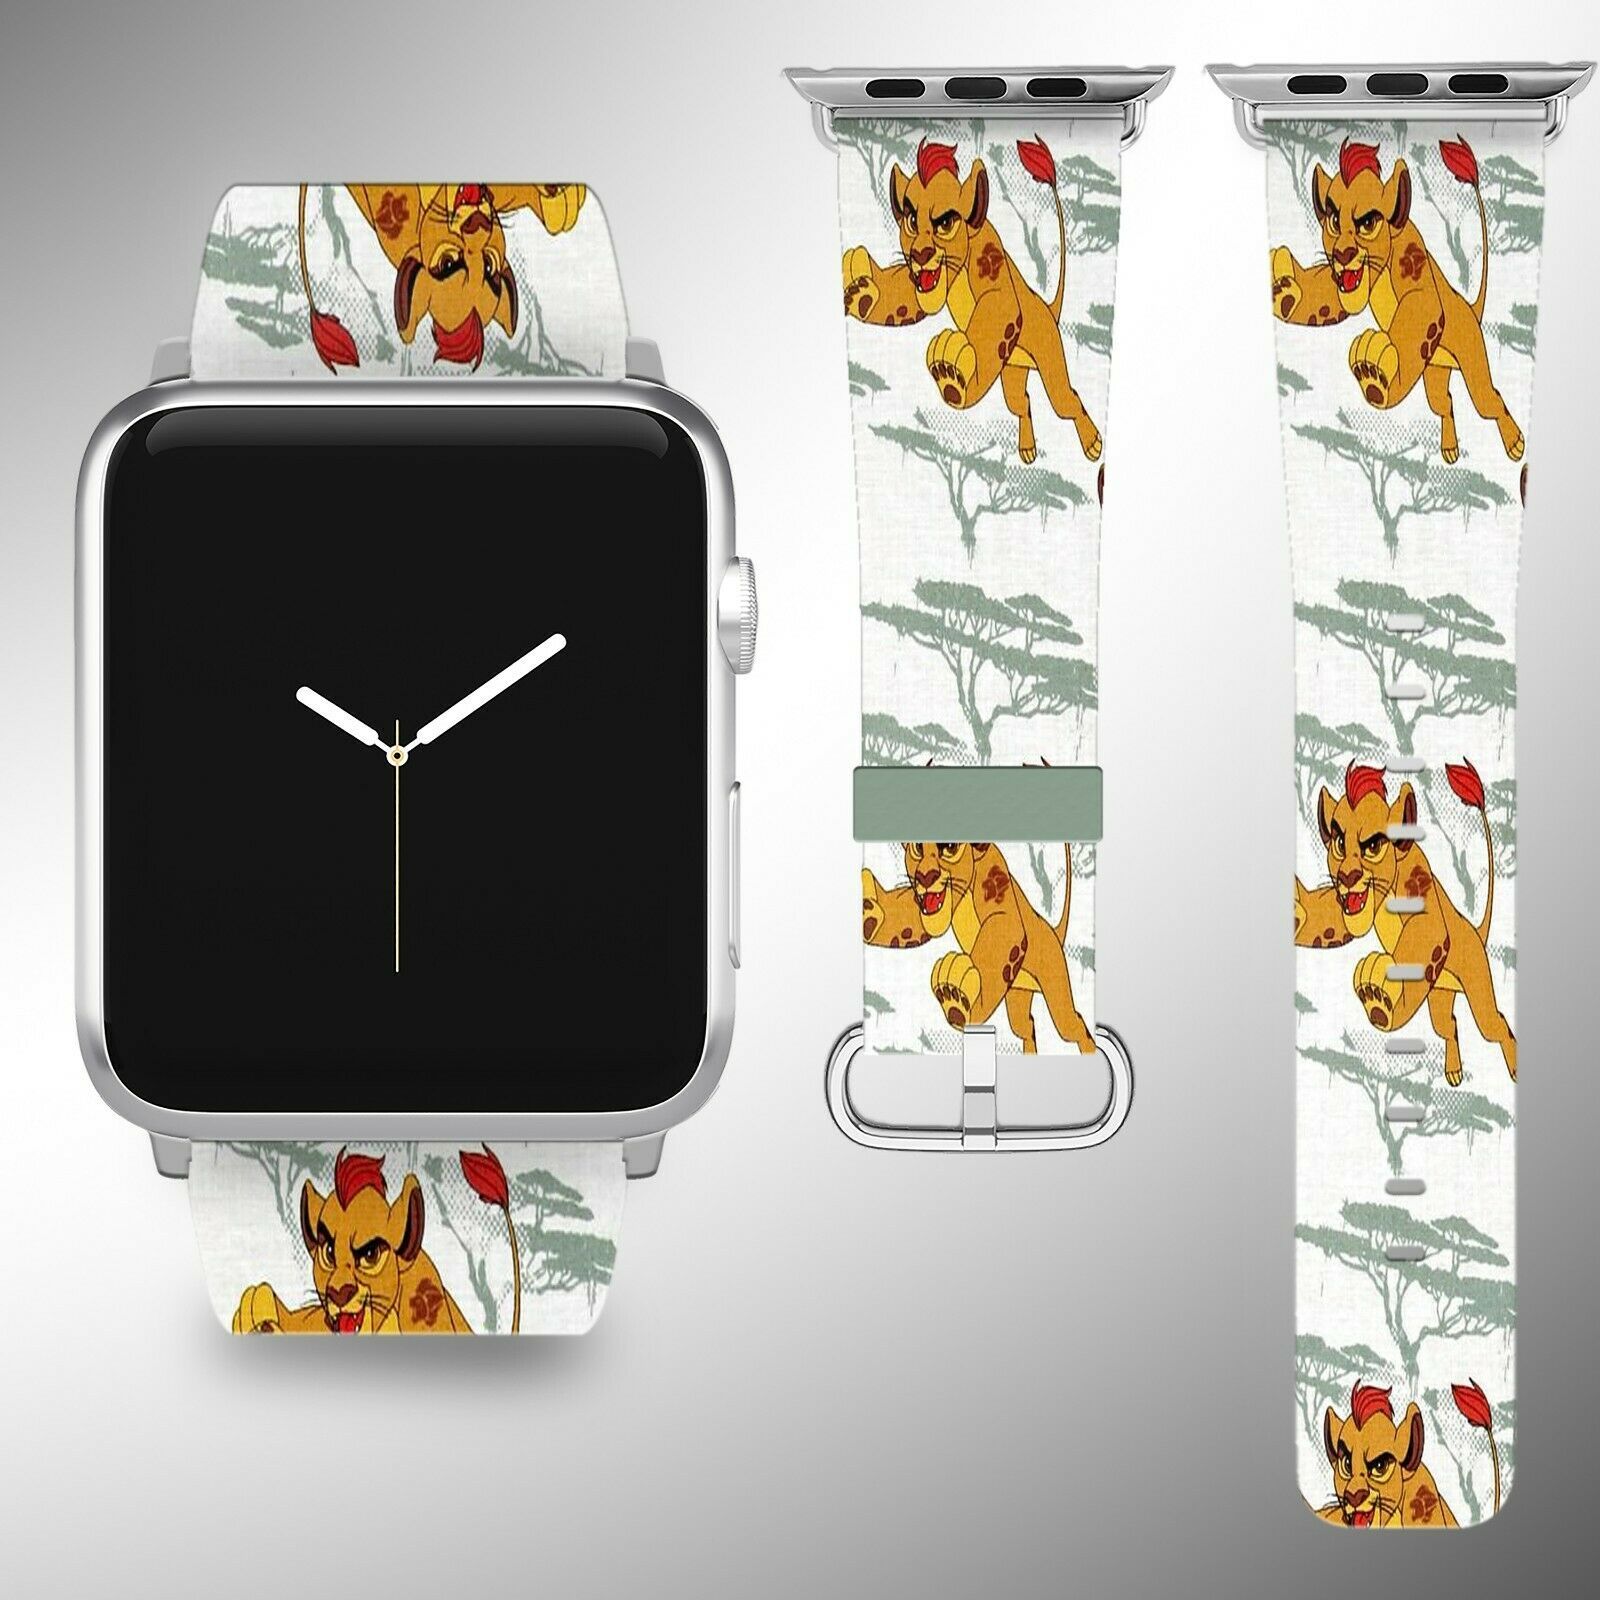 The Lion King Simba Apple Watch Band SE 44 40 38 42 mm Series 6 5 3 4 2 Strap - $17.63 - $20.57